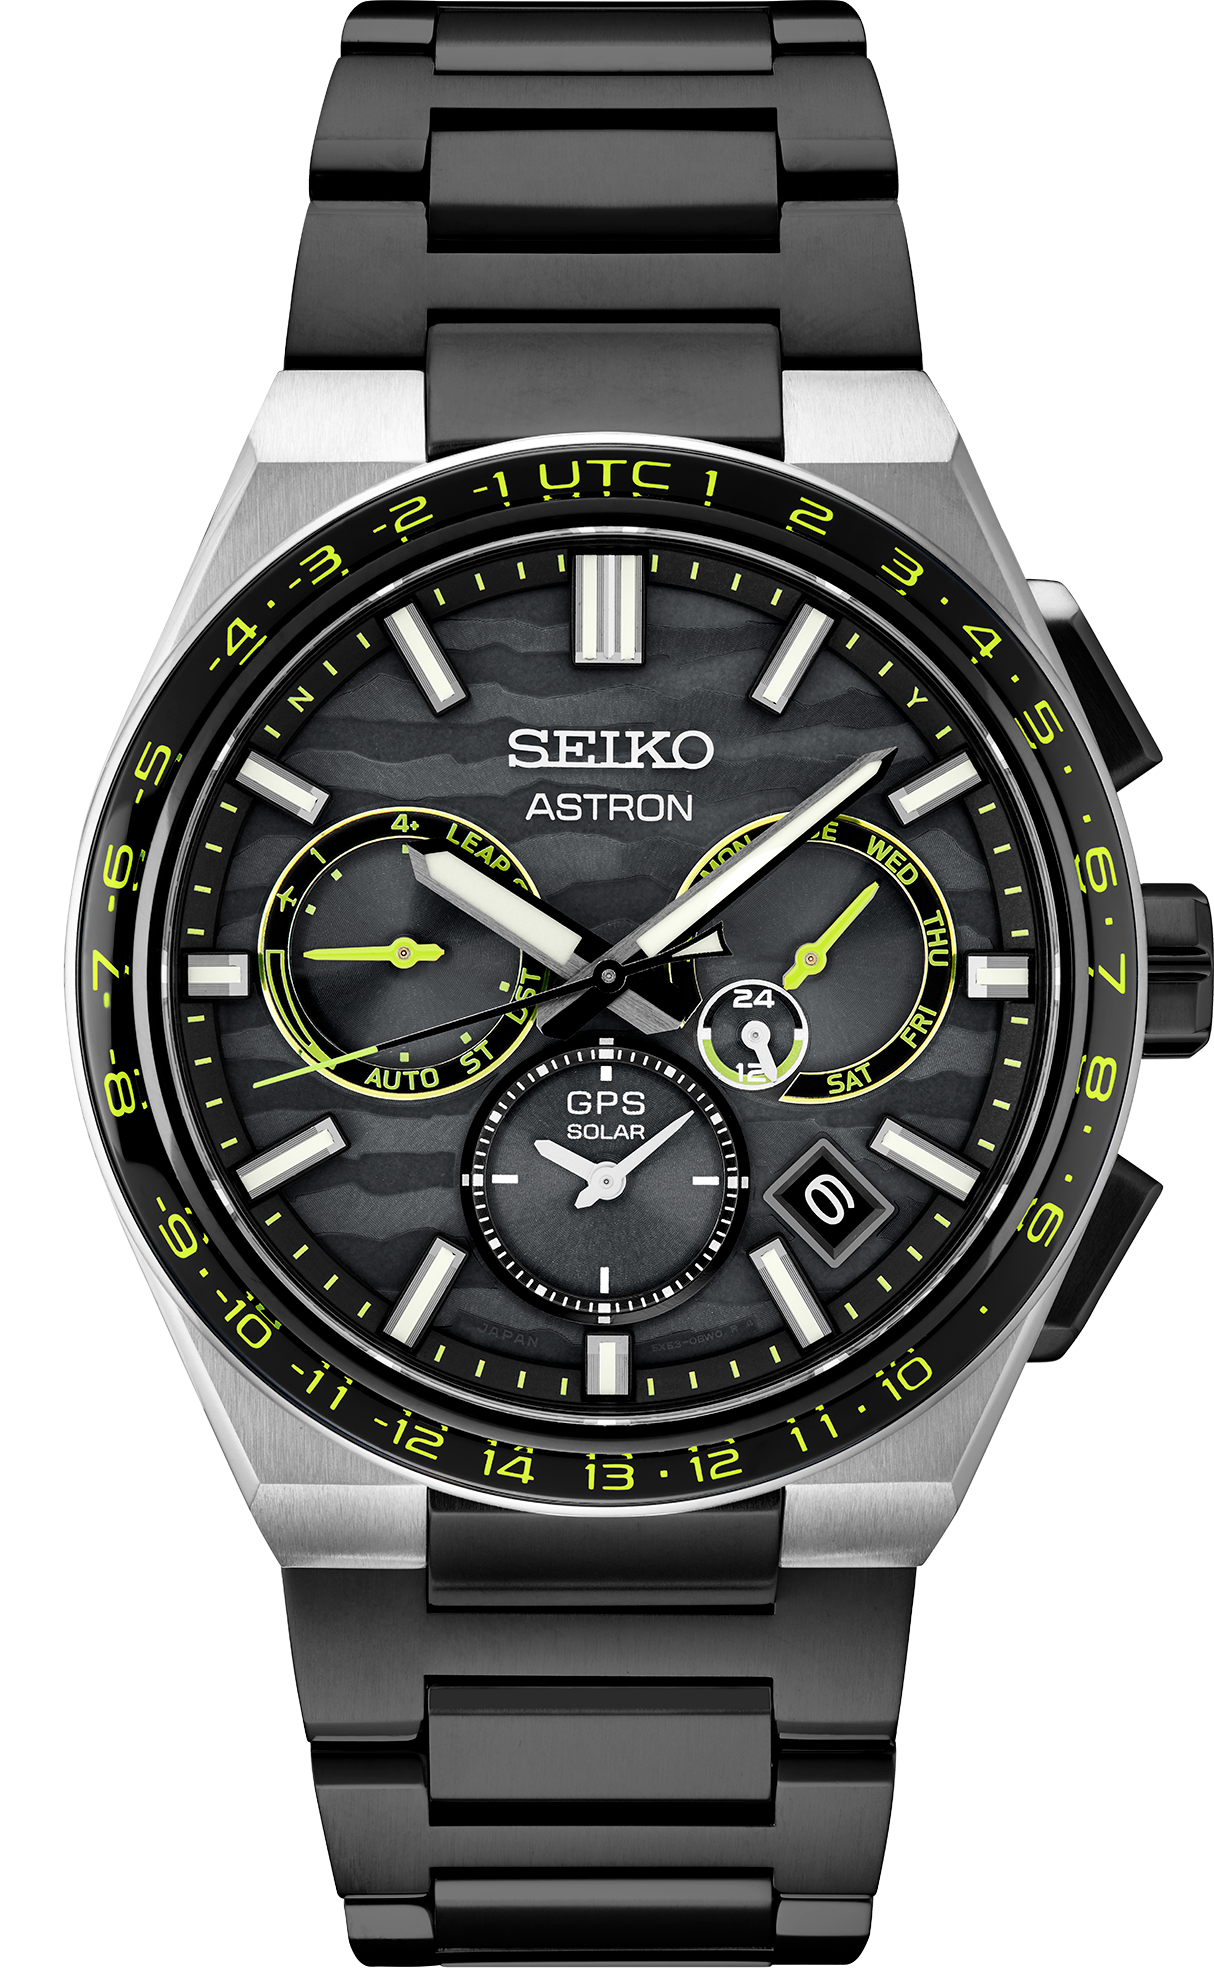 SSH139 Seiko Astron Solar GPS Titanium case with super-hard coating and green accents on bezel and dial